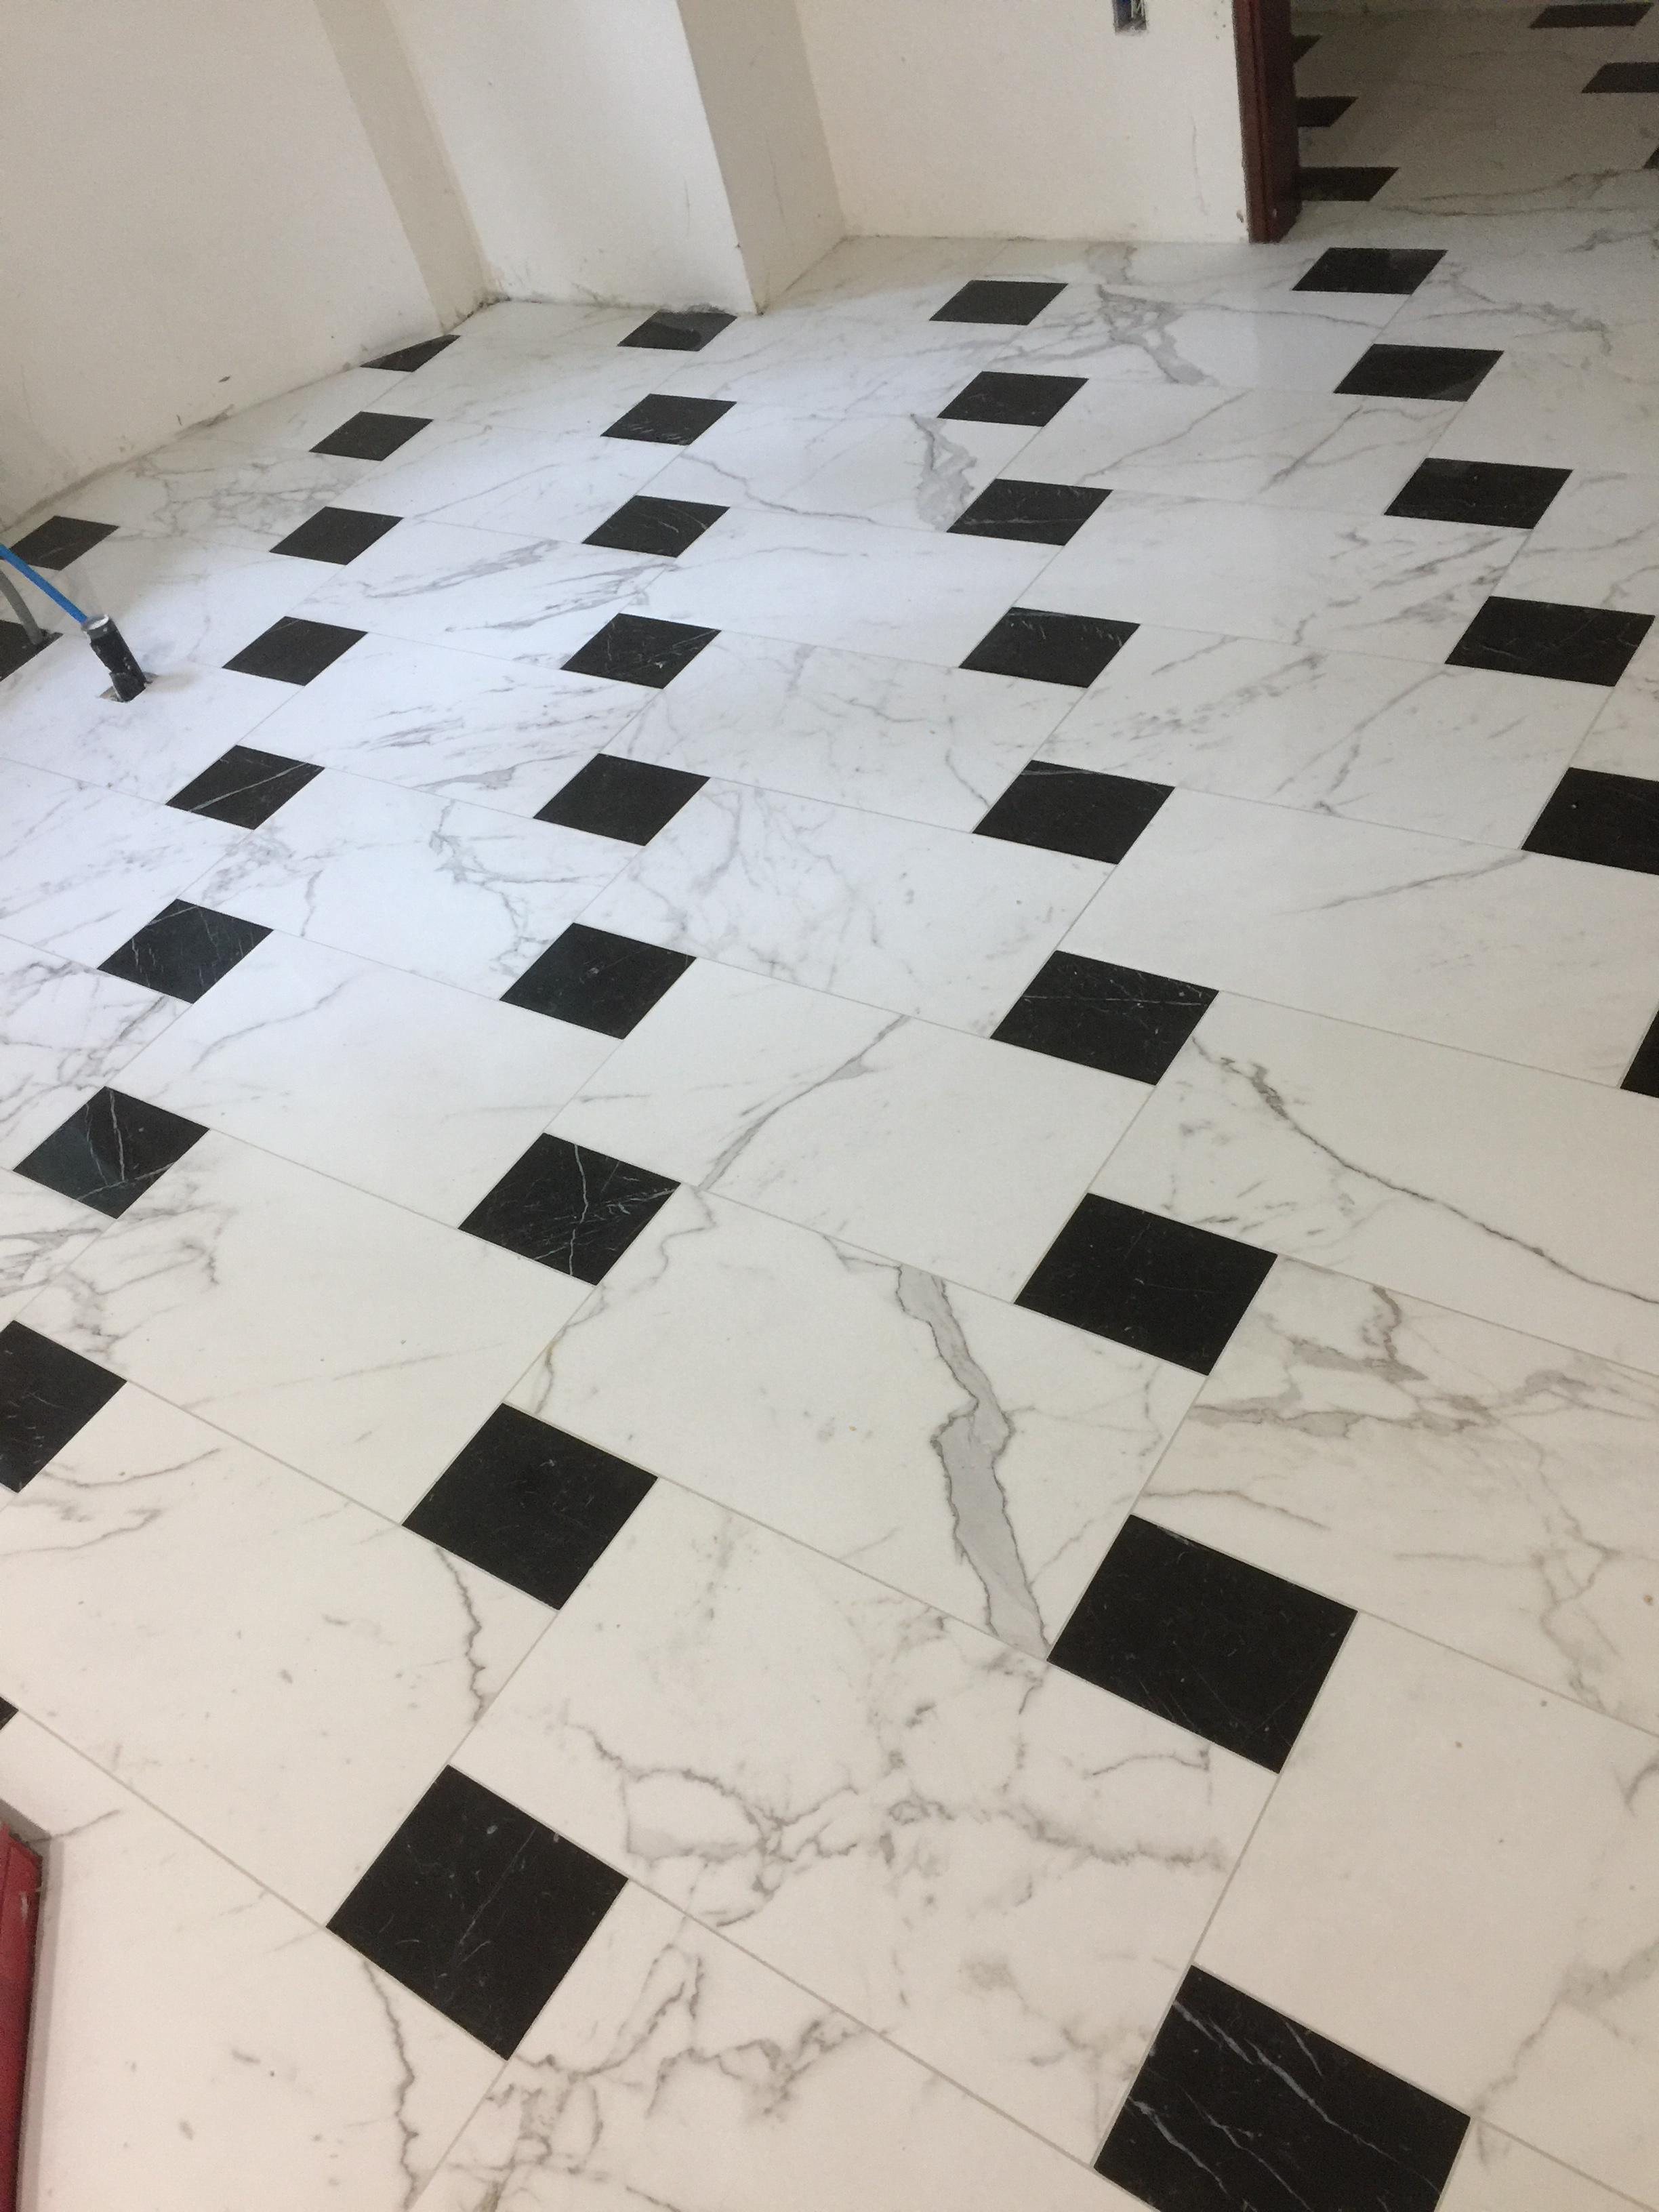 Call now for a tile contractor you can count on!